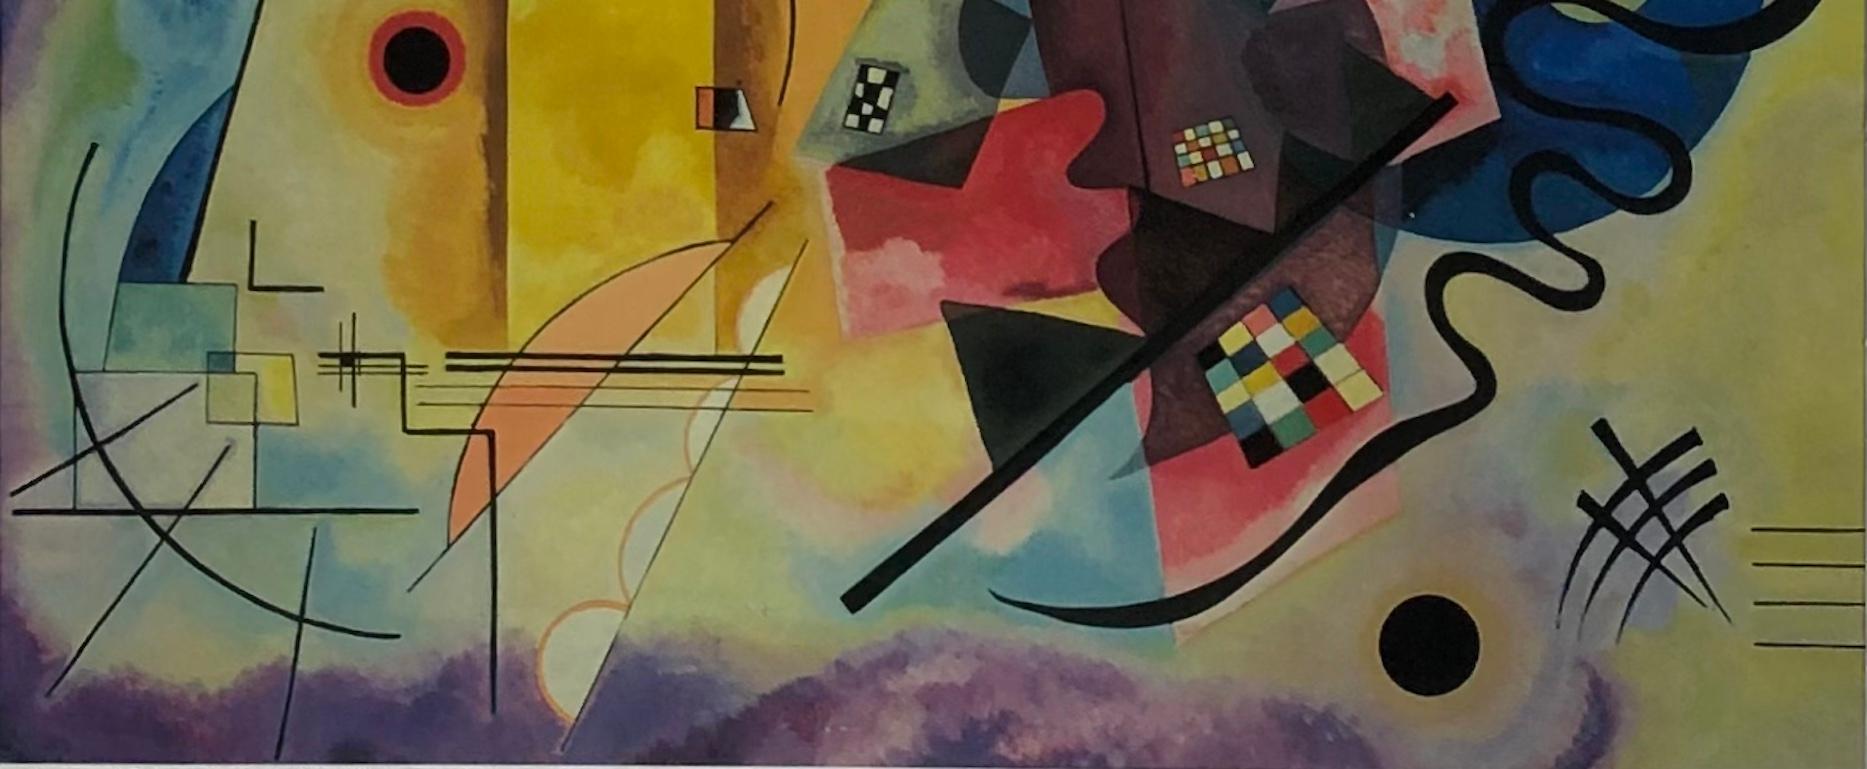 yellow-red-blue by wassily kandinsky